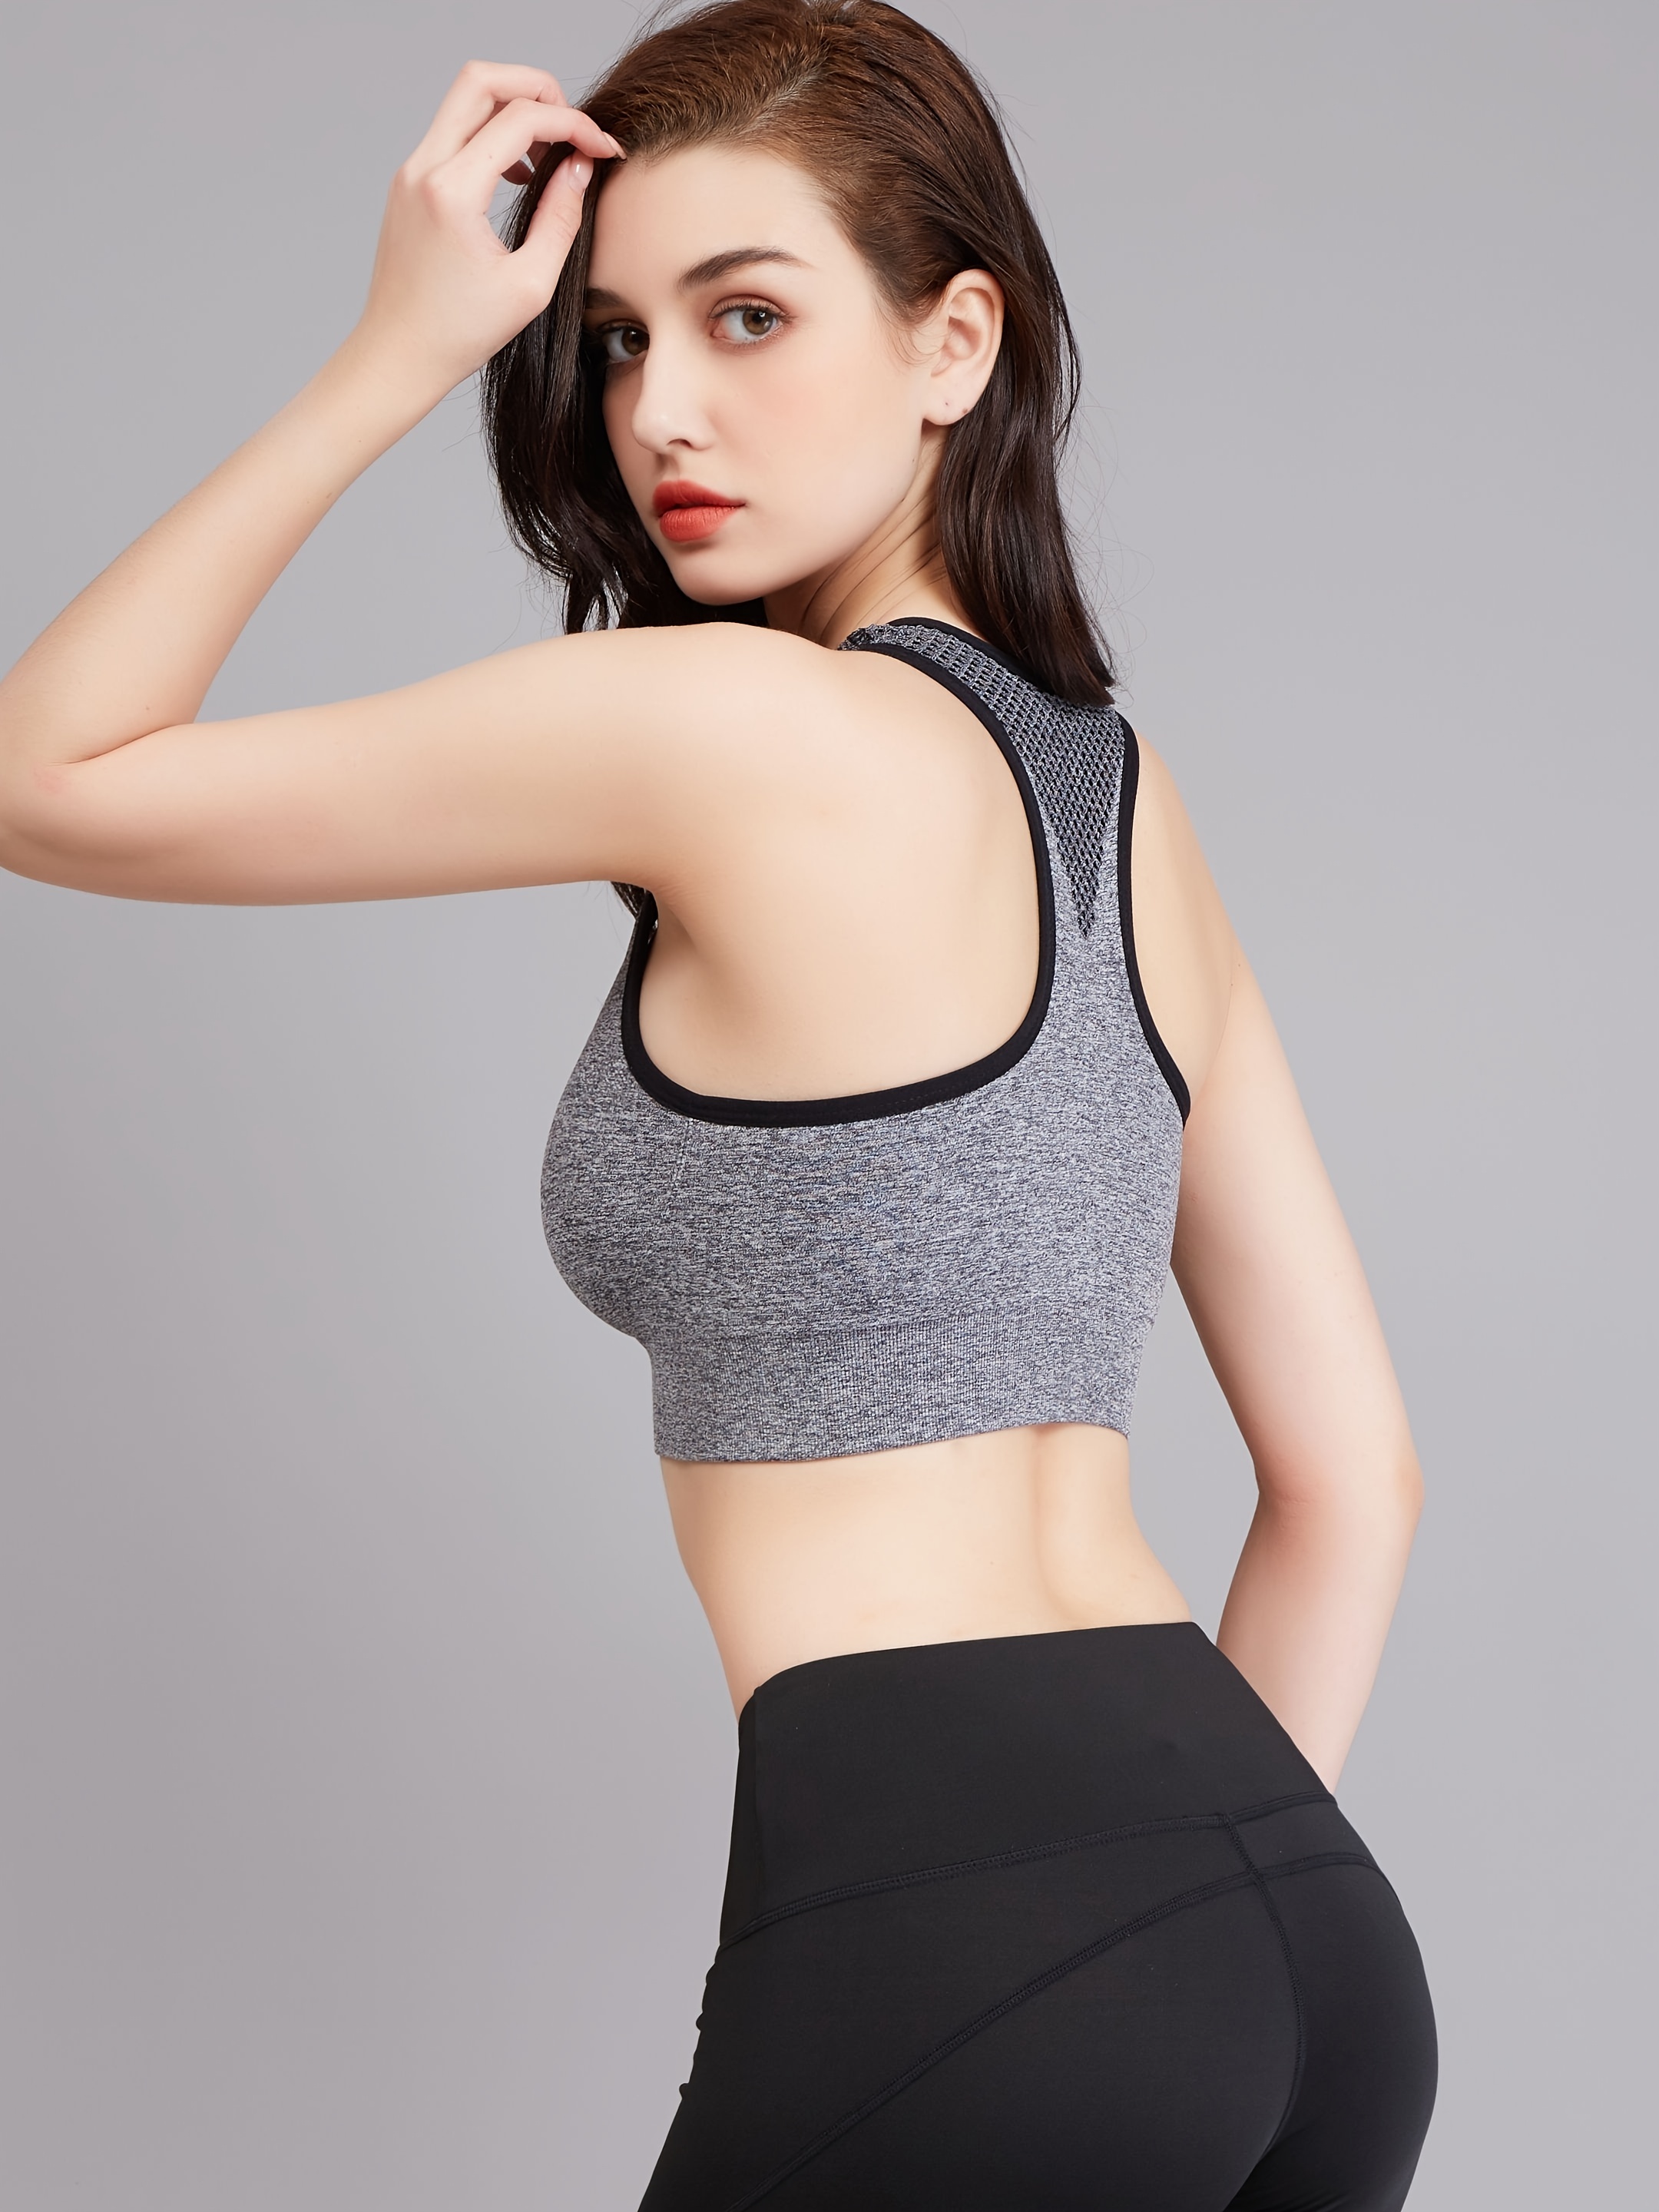 Shake Proof Tank Yoga Bra With Padded Long Line For Women Free To Be Gym,  Running, And Fitness Shirt Vest From Yogaworld, $14.3